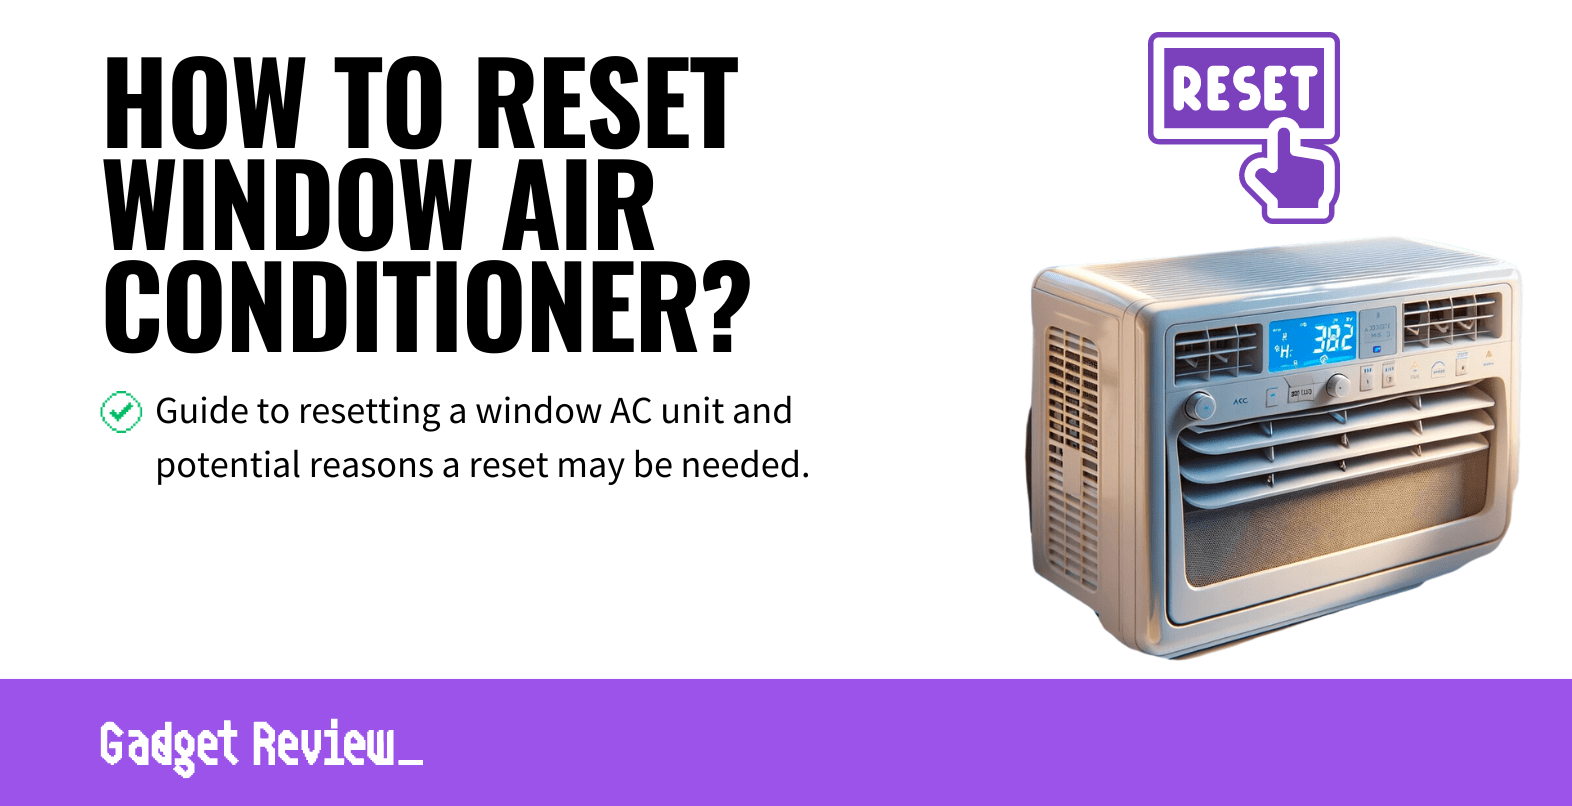 How to Reset a Window Air Conditioner